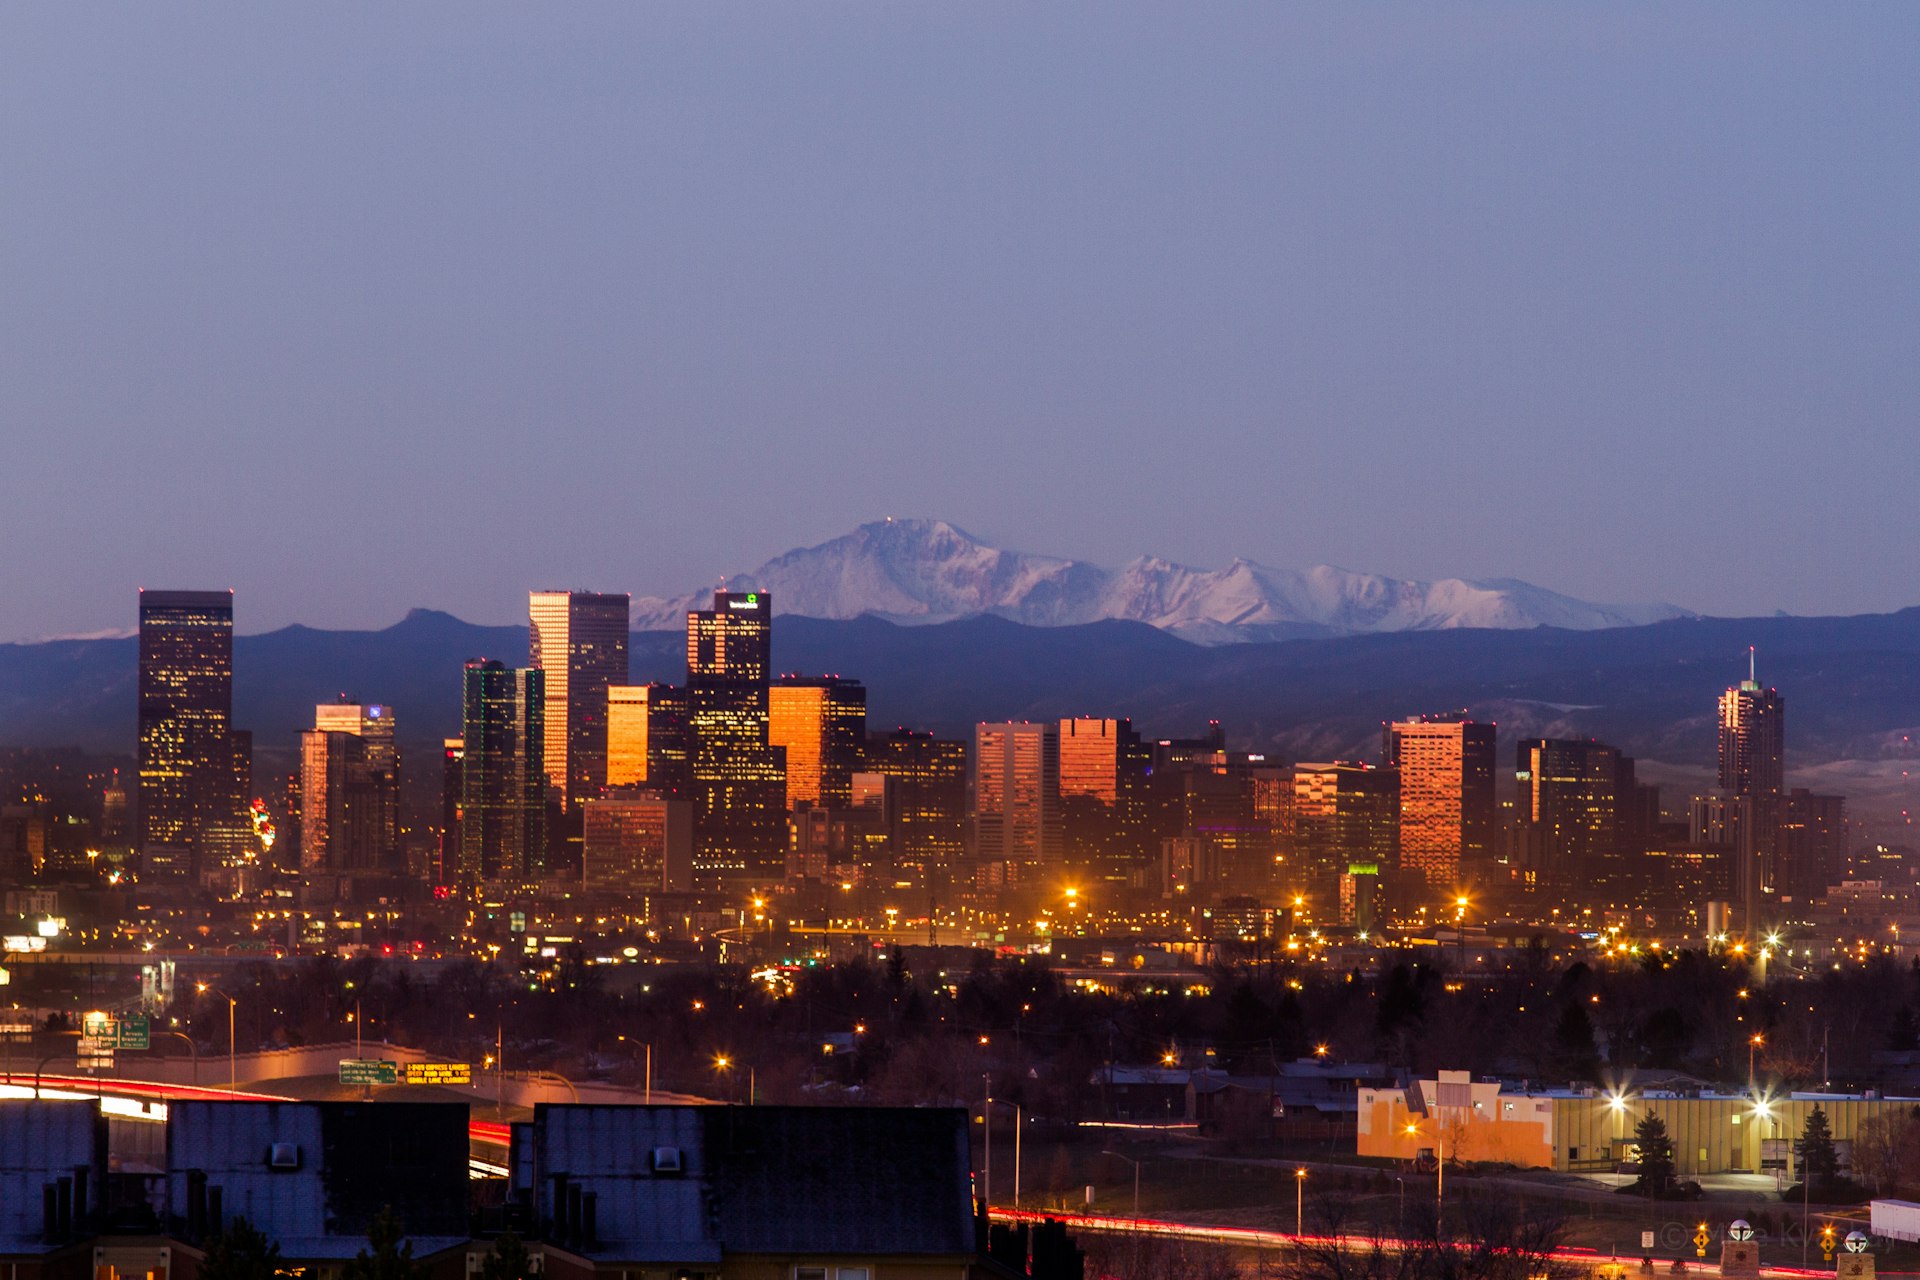 500px Photo ID: 103006253 - Denver city skyline photographed before sunrise with Pikes Peak Behind (14,000 foot mountain)